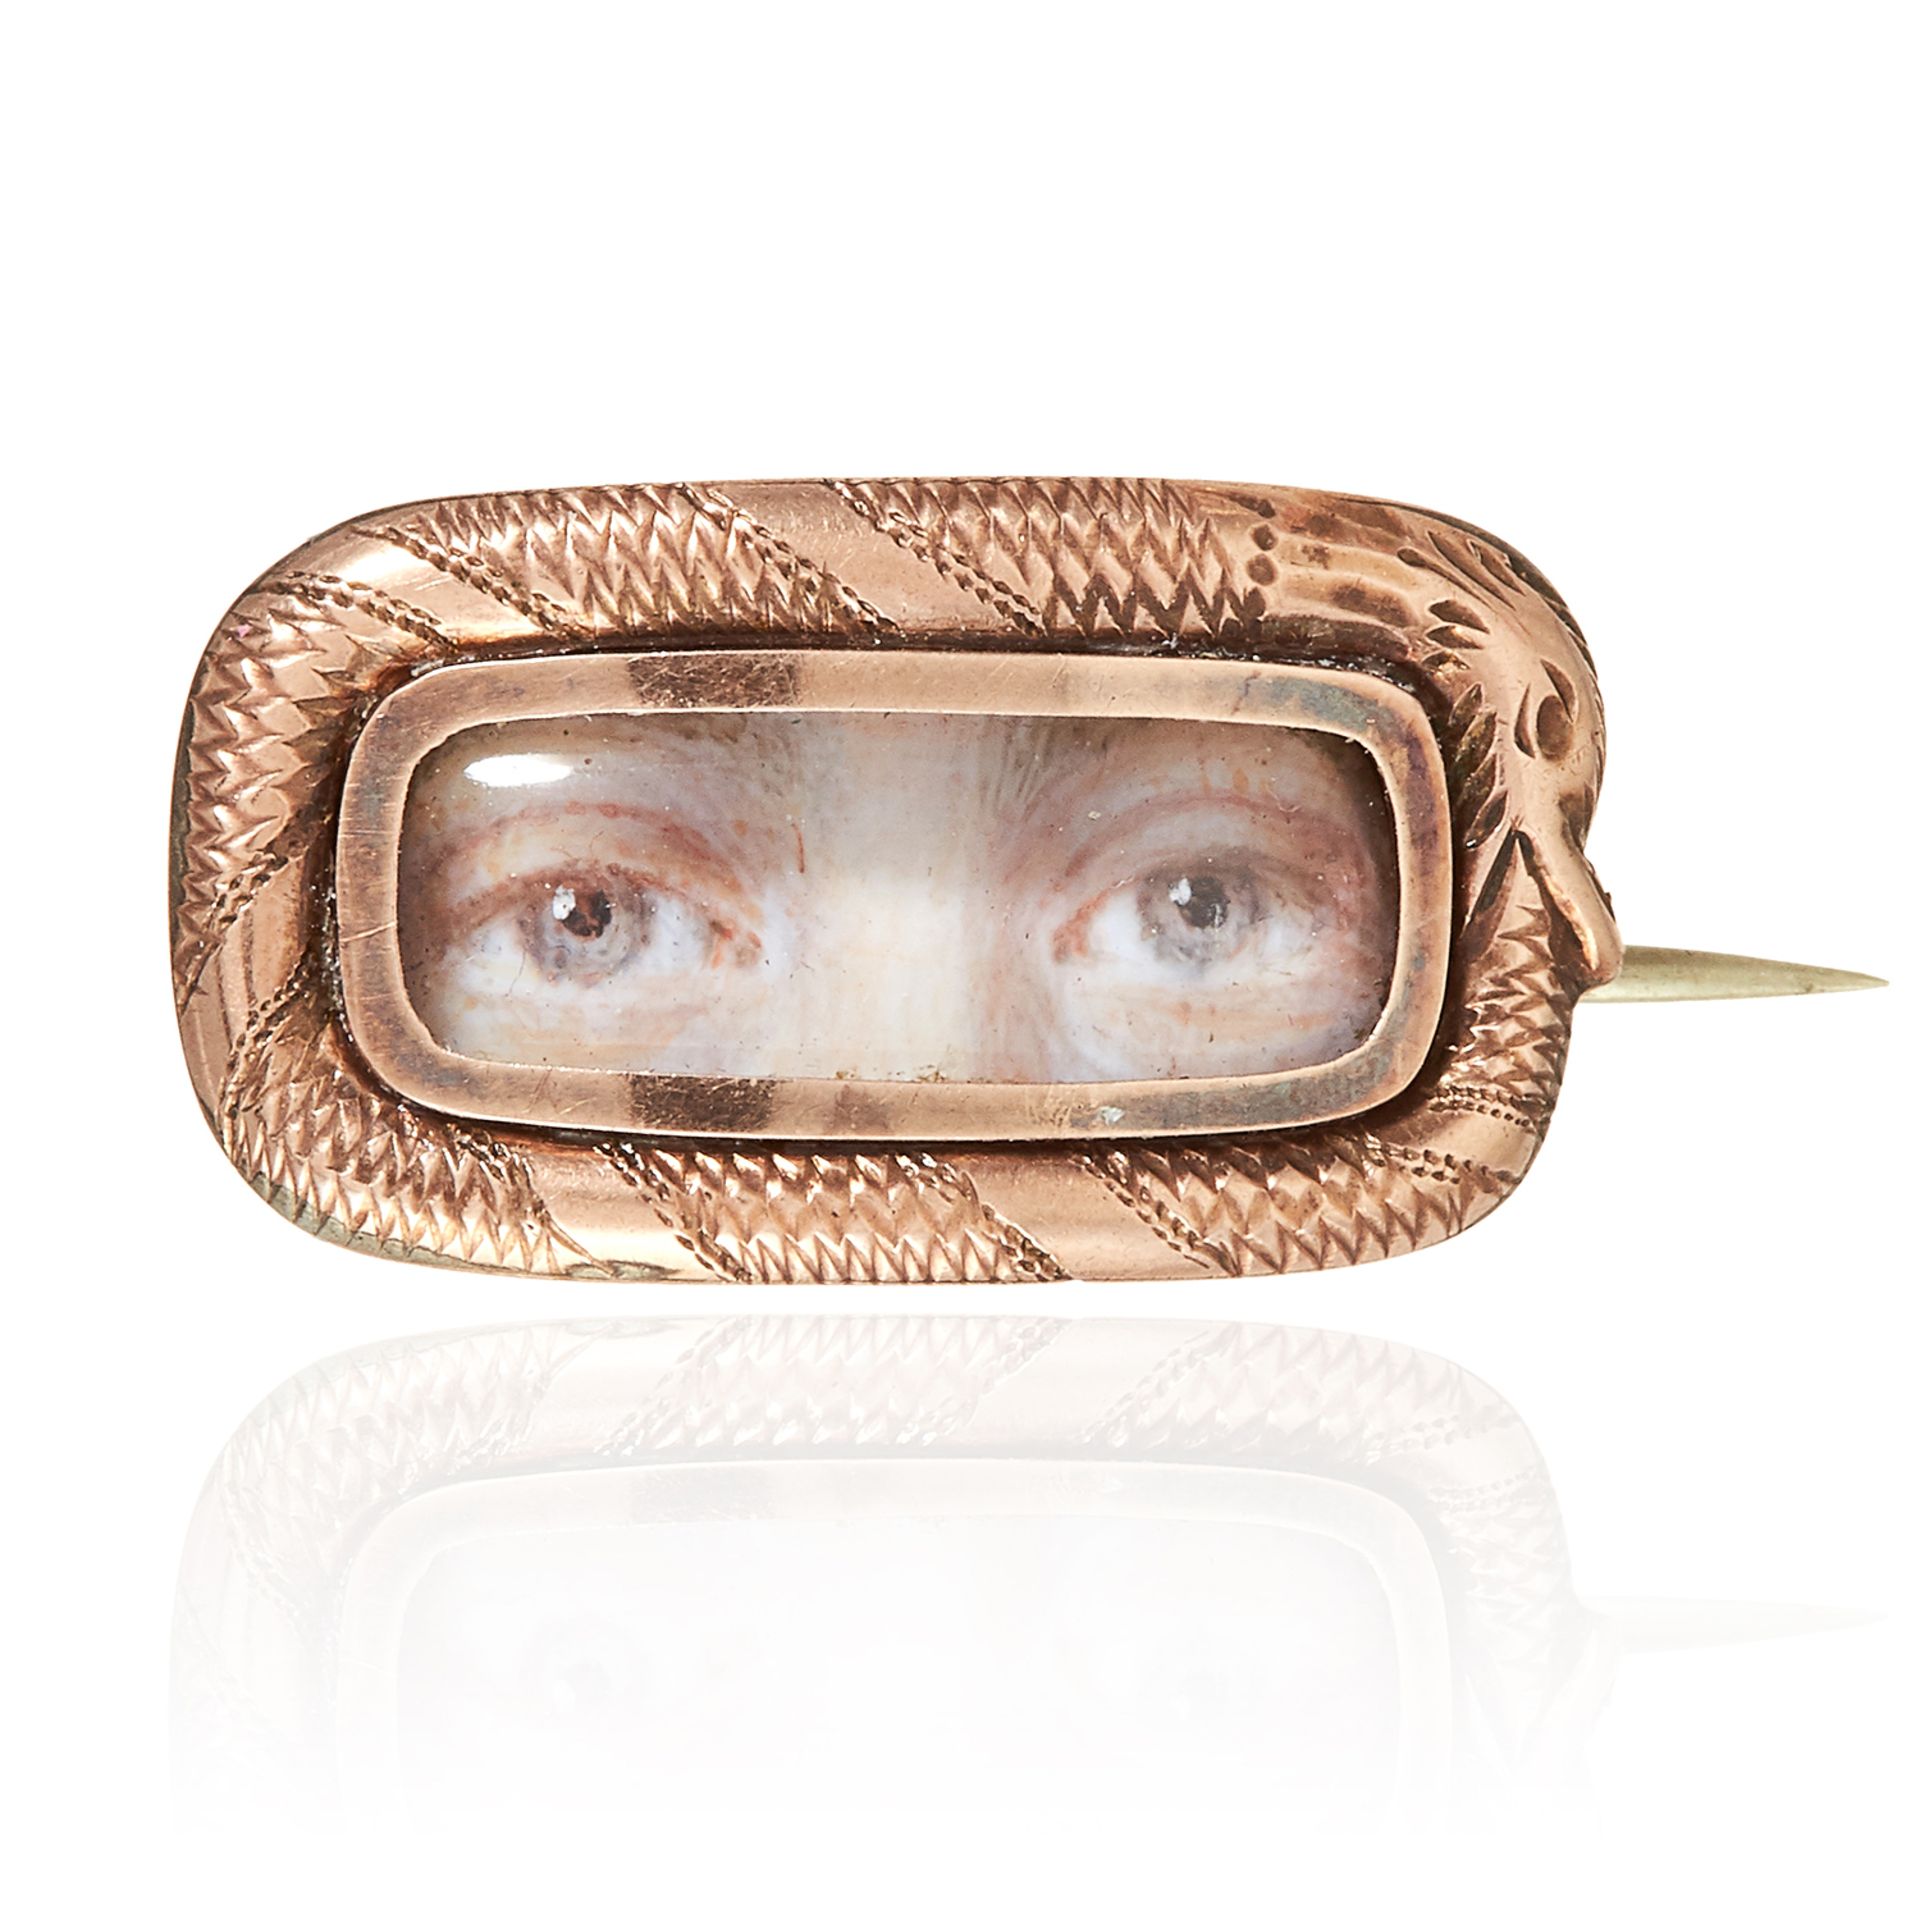 AN ANTIQUE SEEING EYE PORTRAIT MINIATURE MOURNING BROOCH in yellow gold, the rounded rectangular